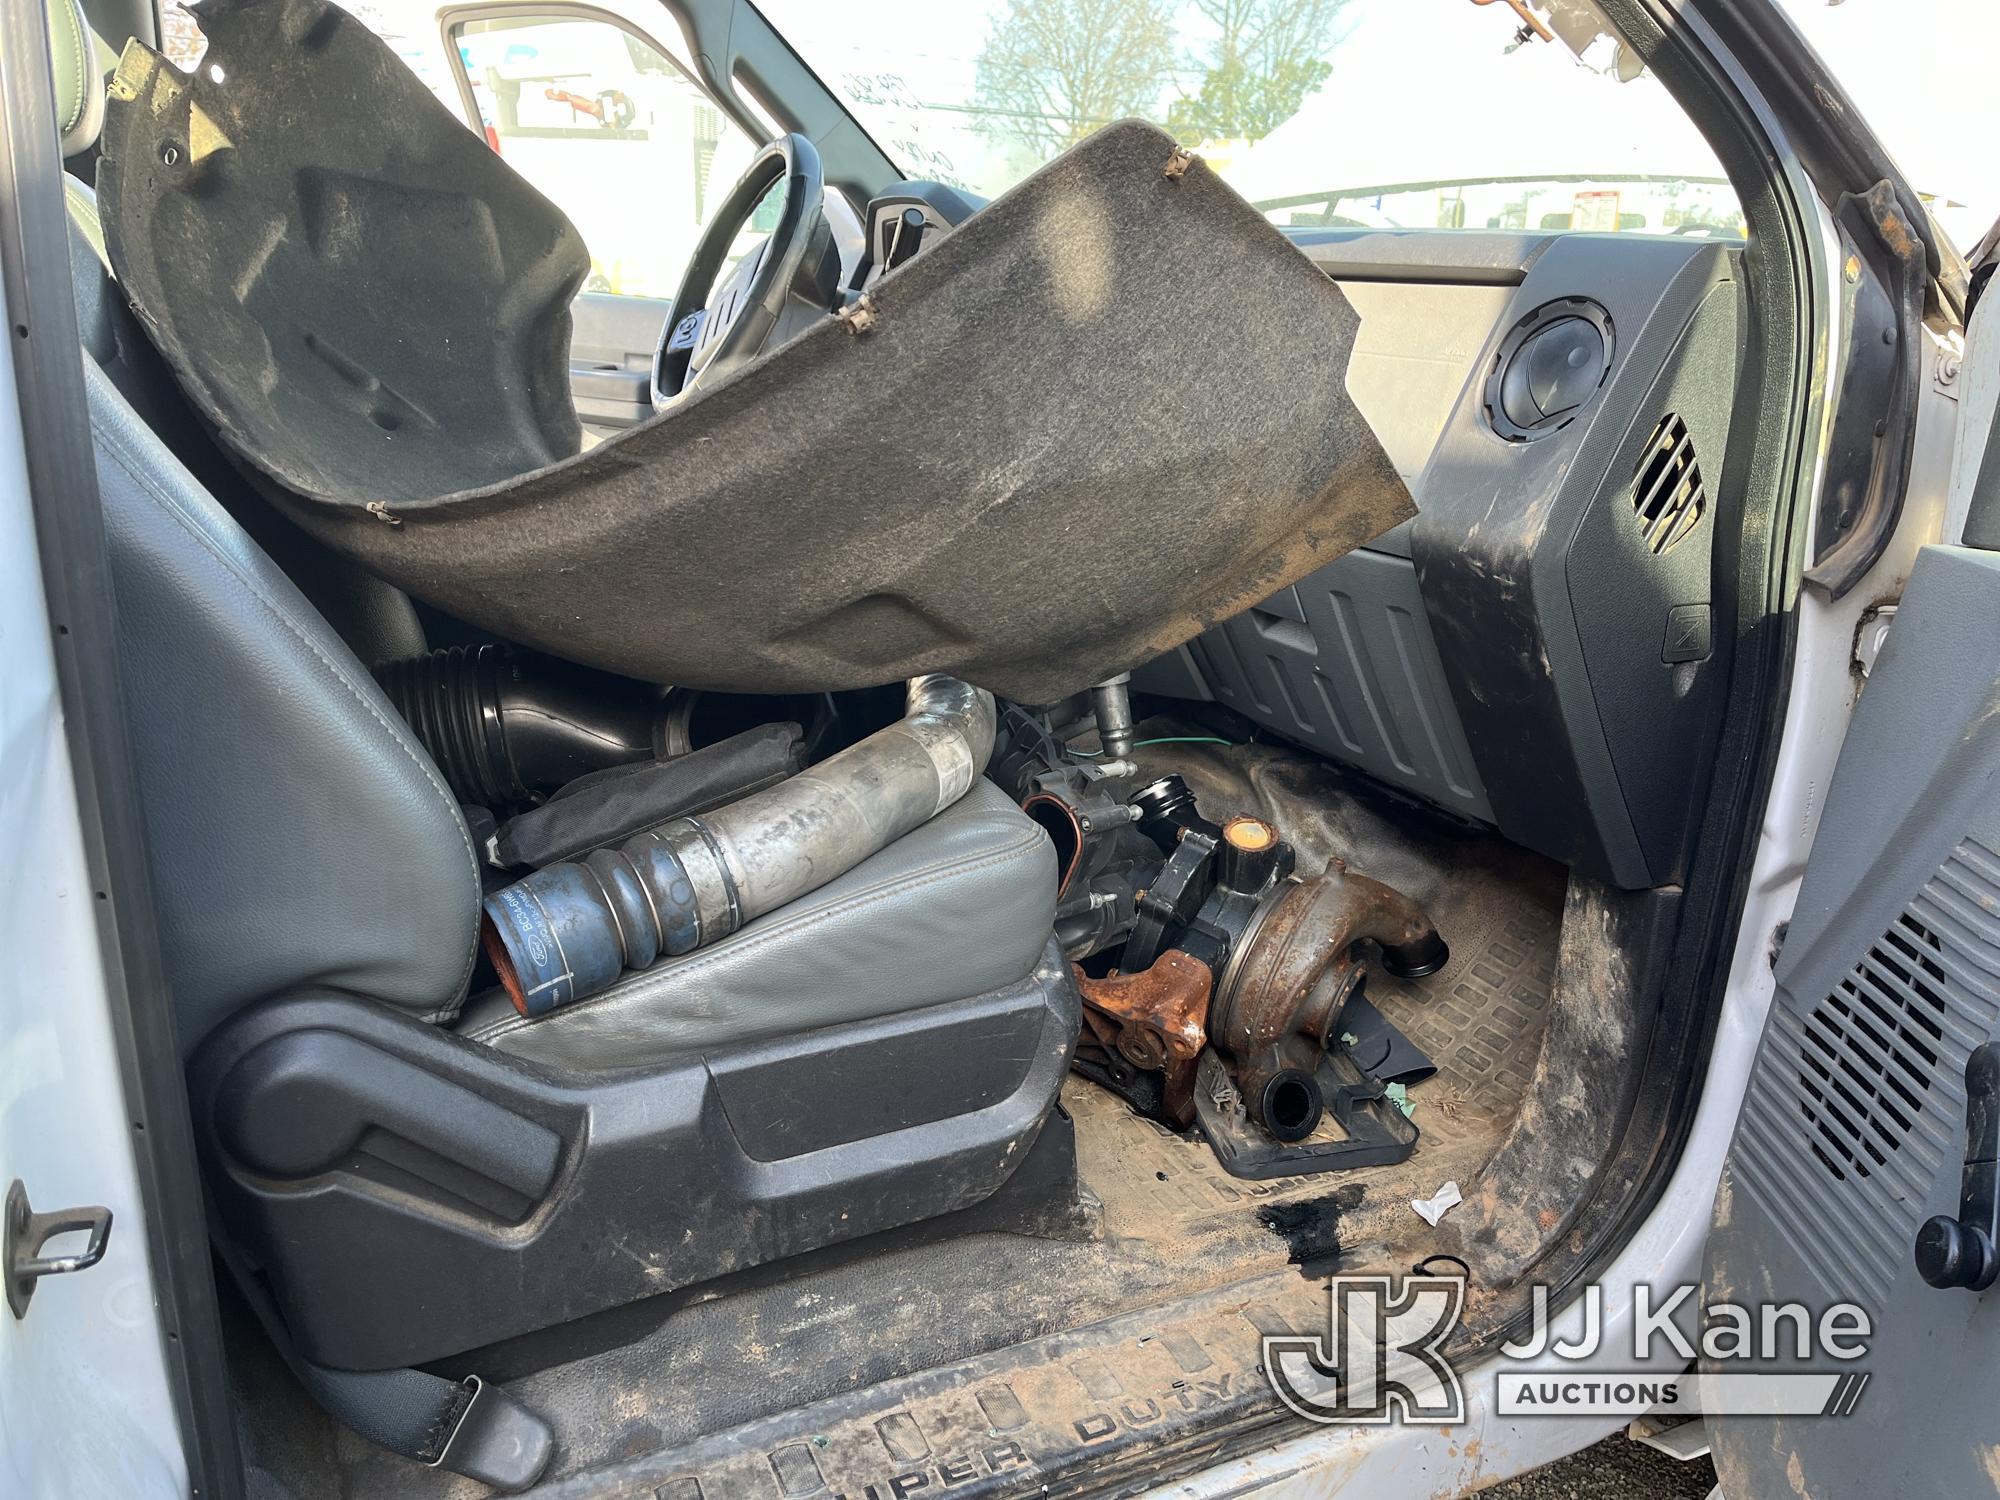 (Charlotte, NC) 2015 Ford F550 Cab & Chassis Not Running, Condition Unknown) (Seller States: Engine